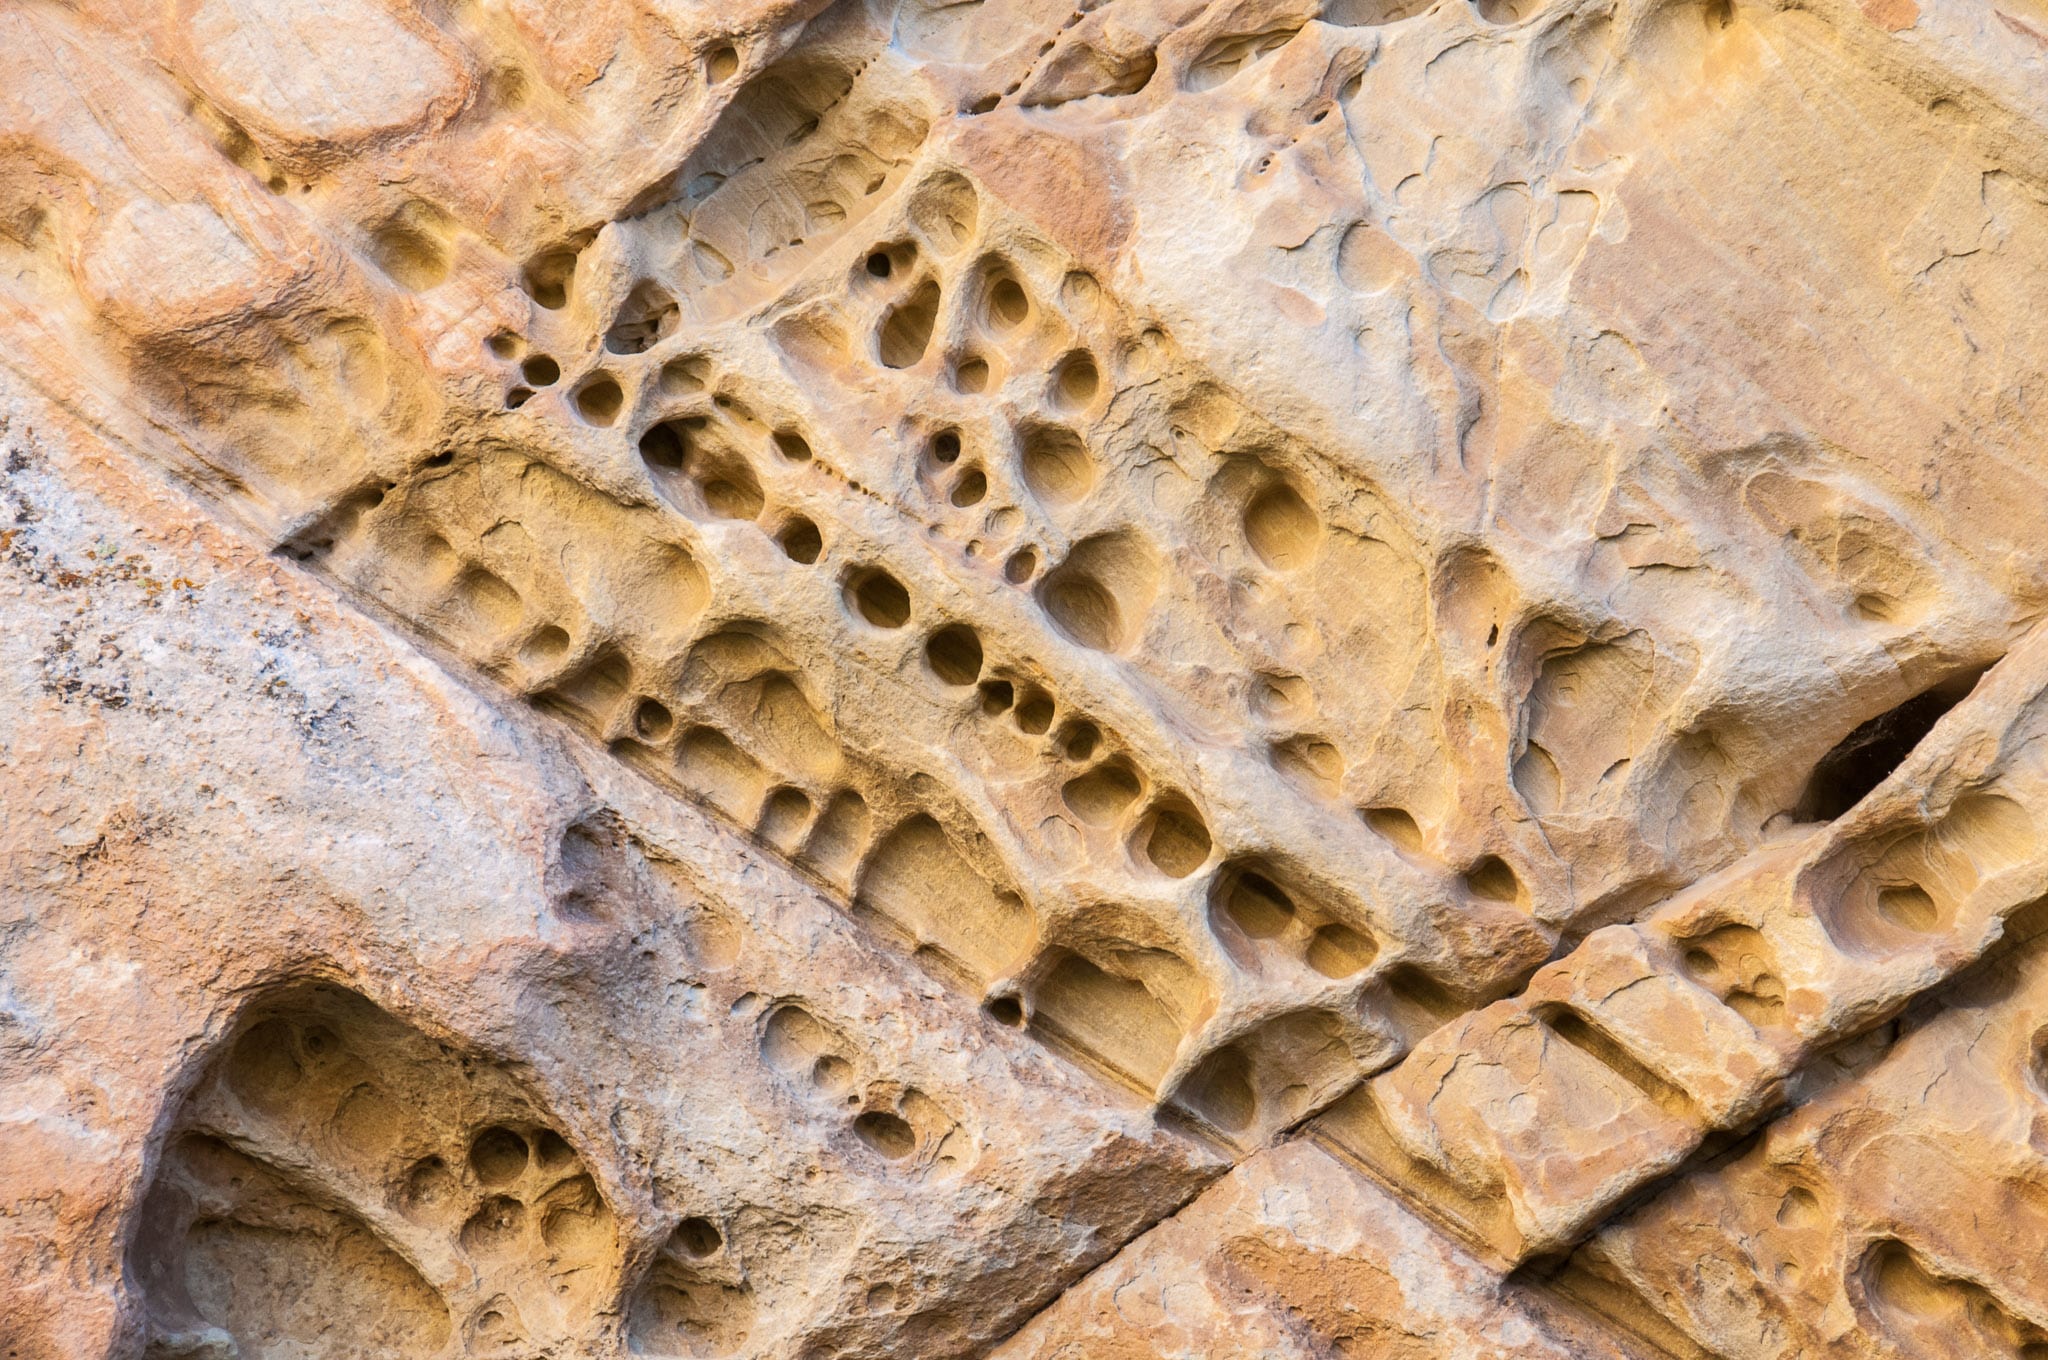 Holes in sandstone cliffs, also called tafoni, is in box canyon north of the Josie Morris Ranch In Dinosaur National Monument.